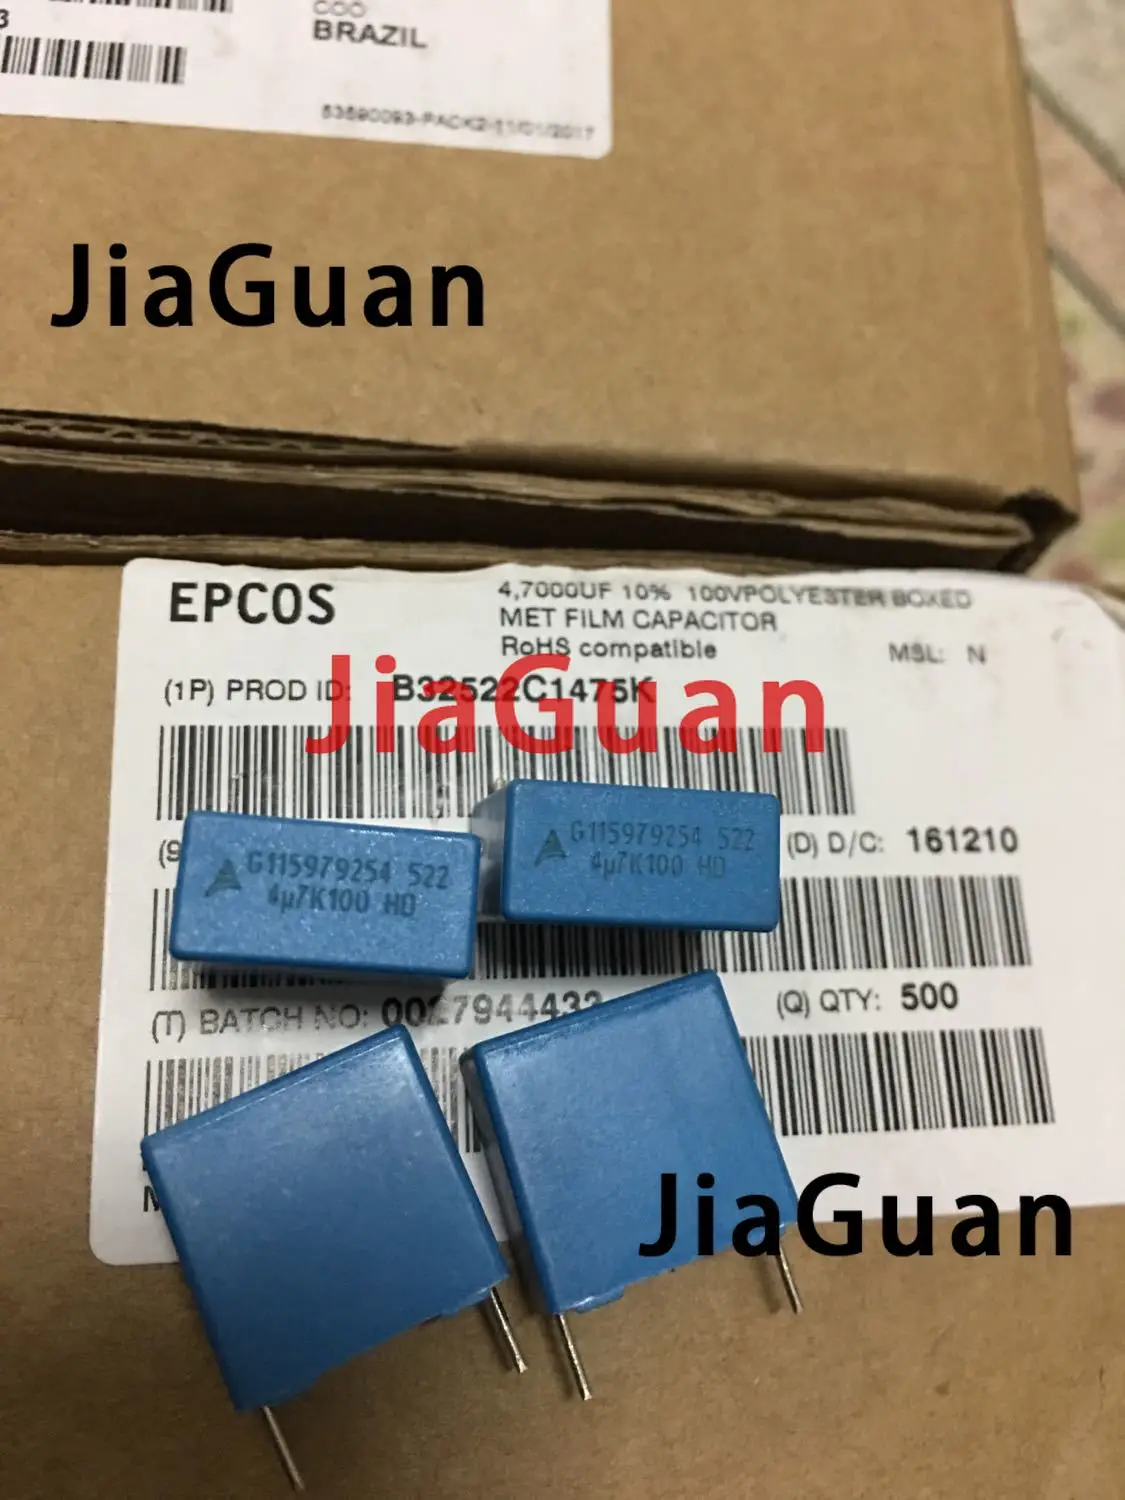 

10PCS NEW EPCOS B32522C1475K 4.7UF 100V PCM15 B32522 4.7UF/100V 475/100v p15mm 4U7 100VDC 4700NF 475